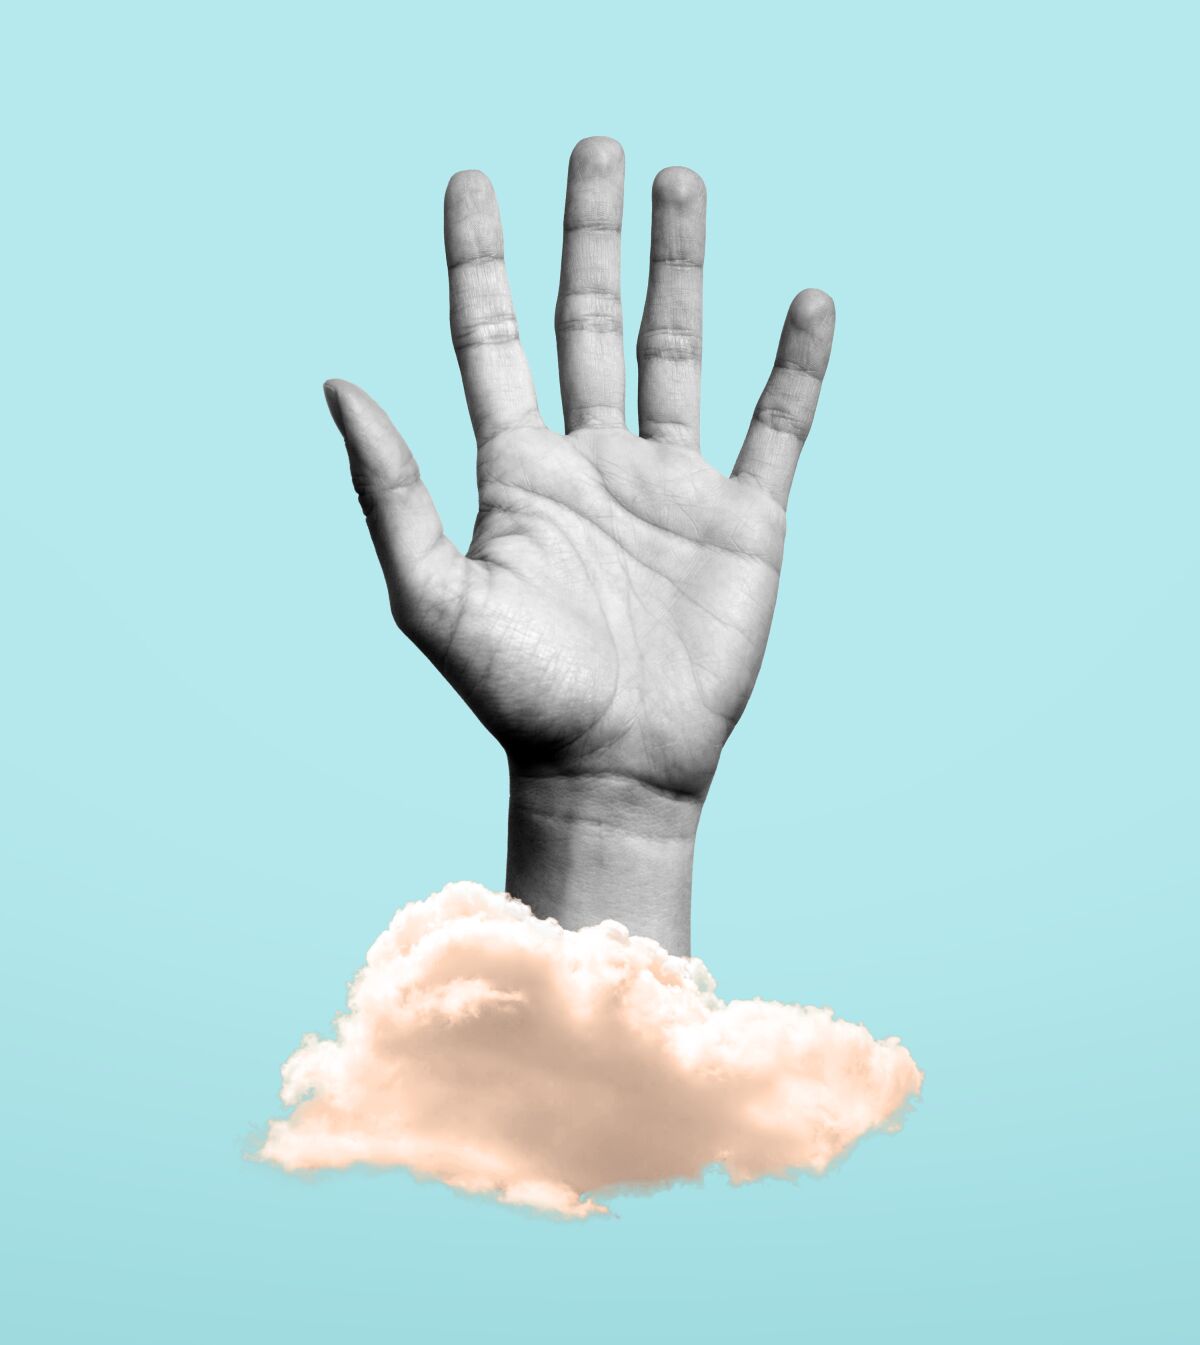 photo illustration of a left hand raising from a sepia-toned cloud on a pale blue background.